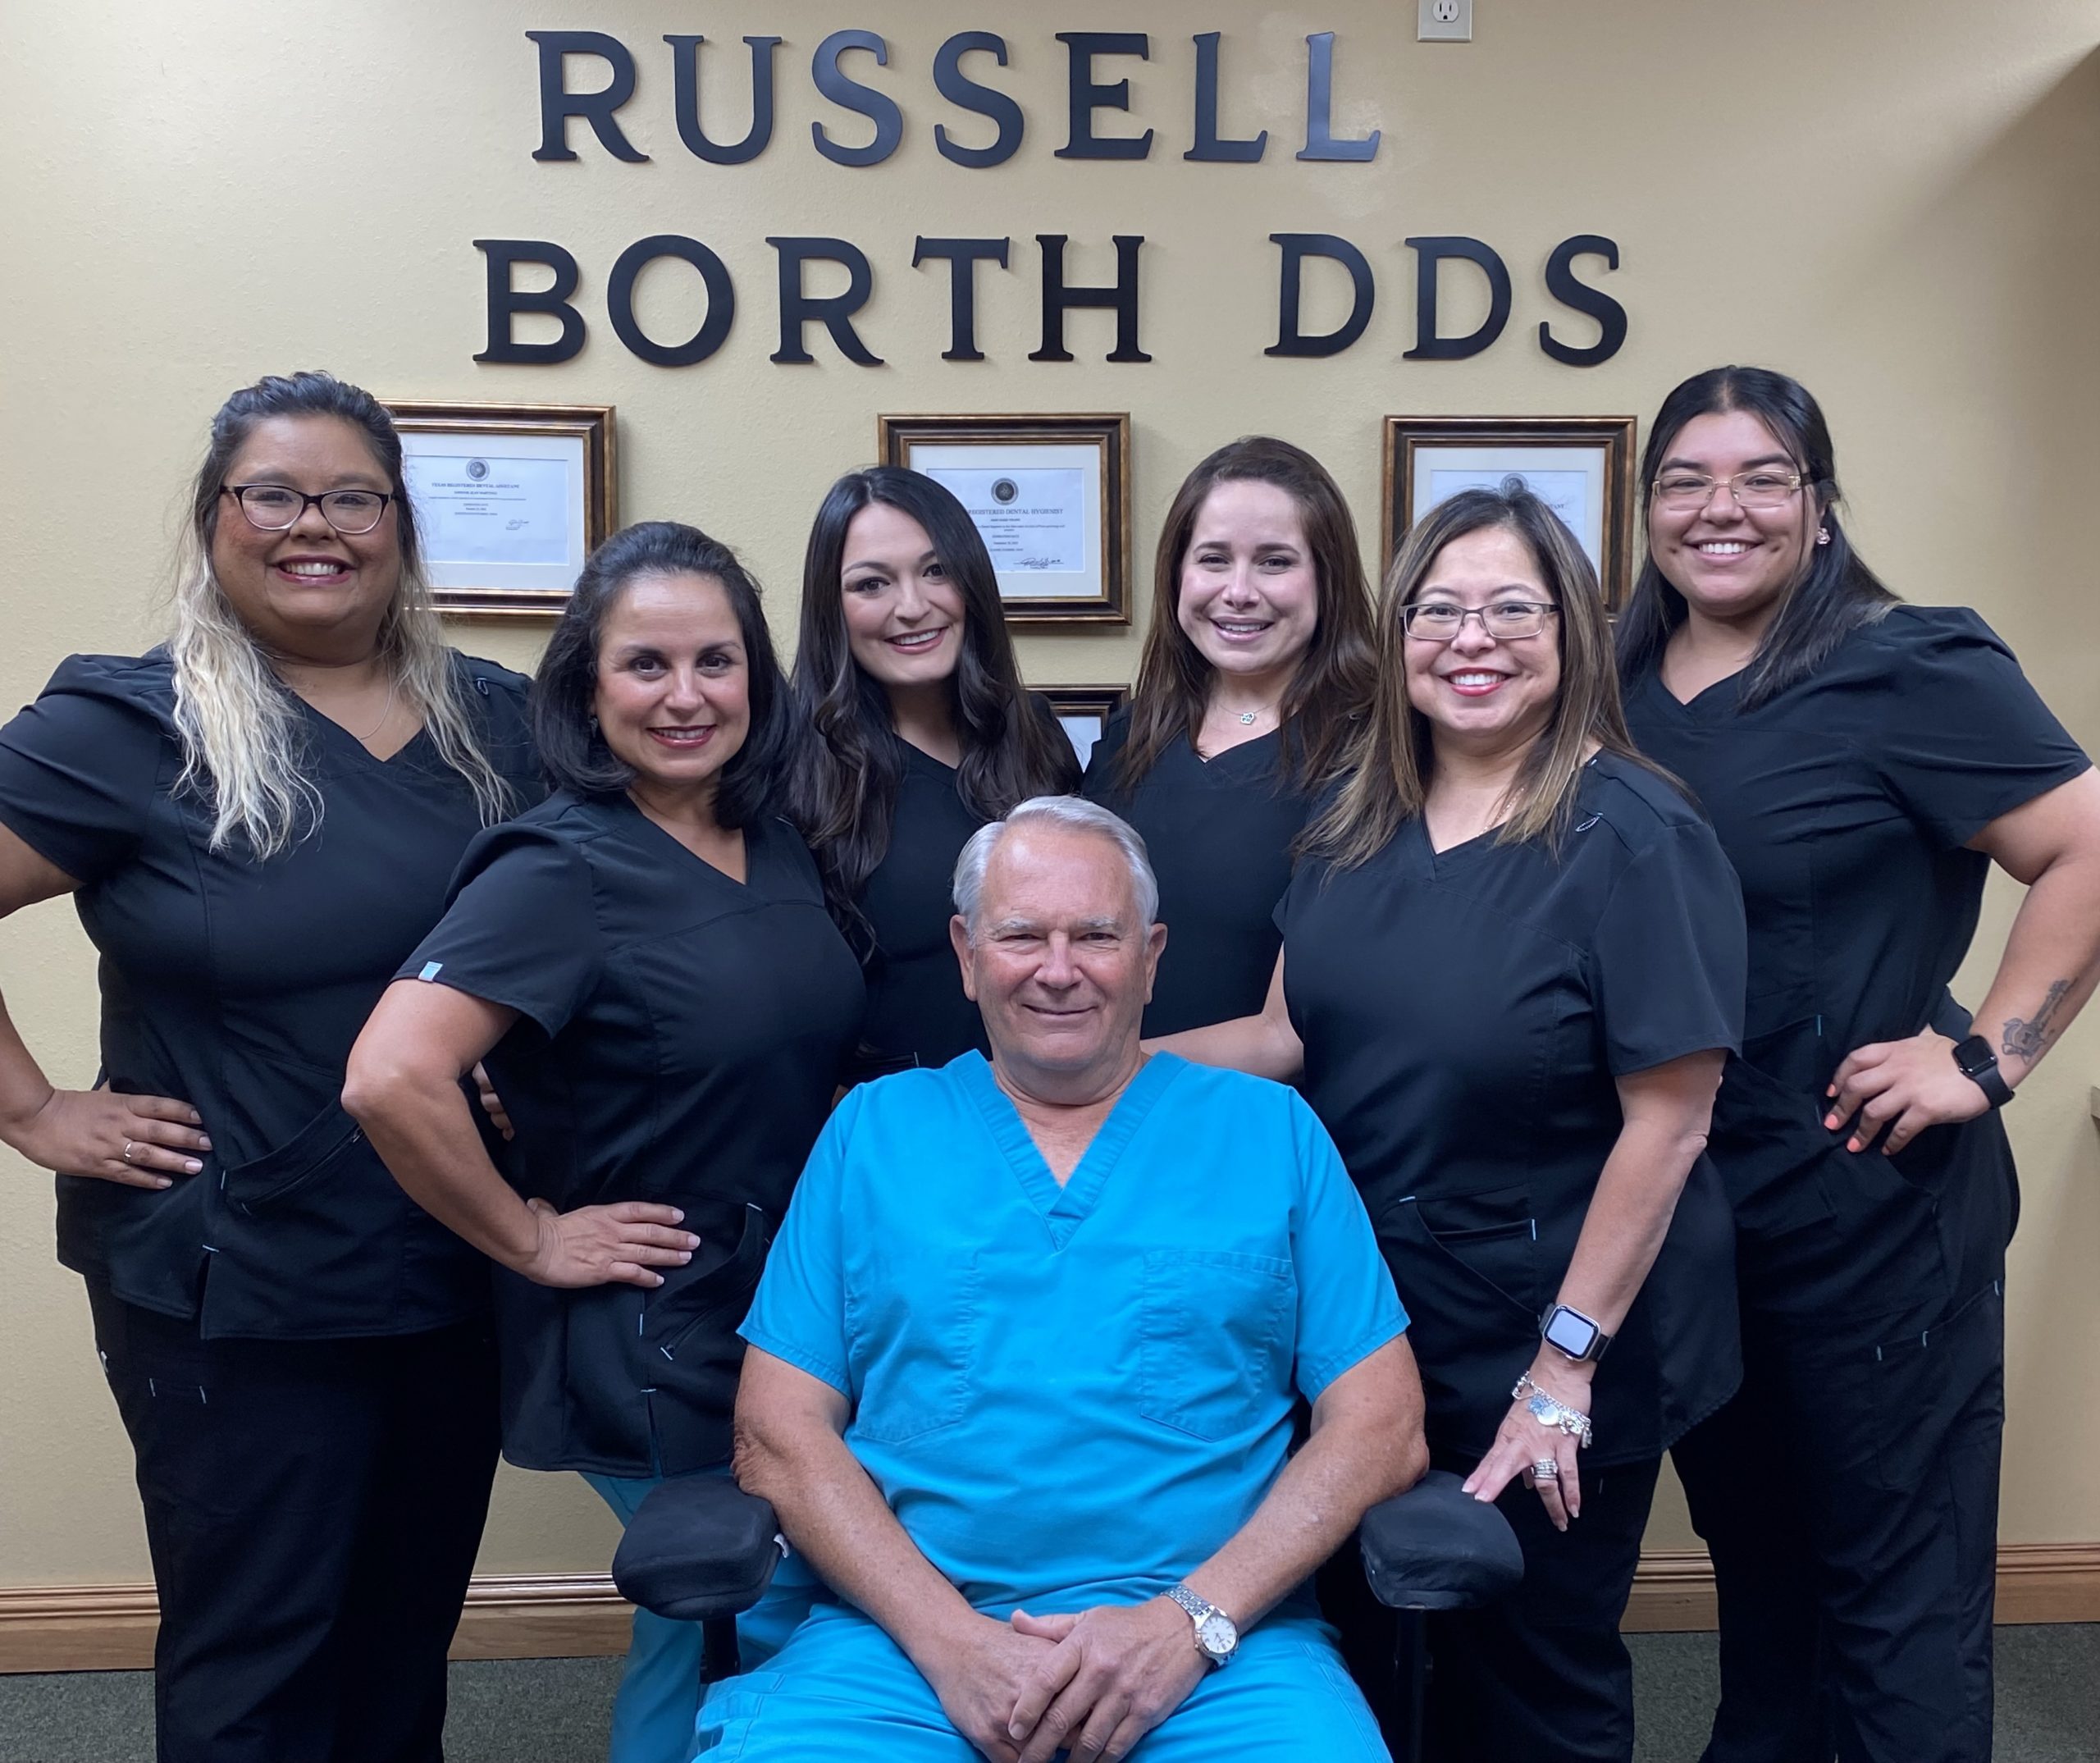 Russel Borth, DDS and staff